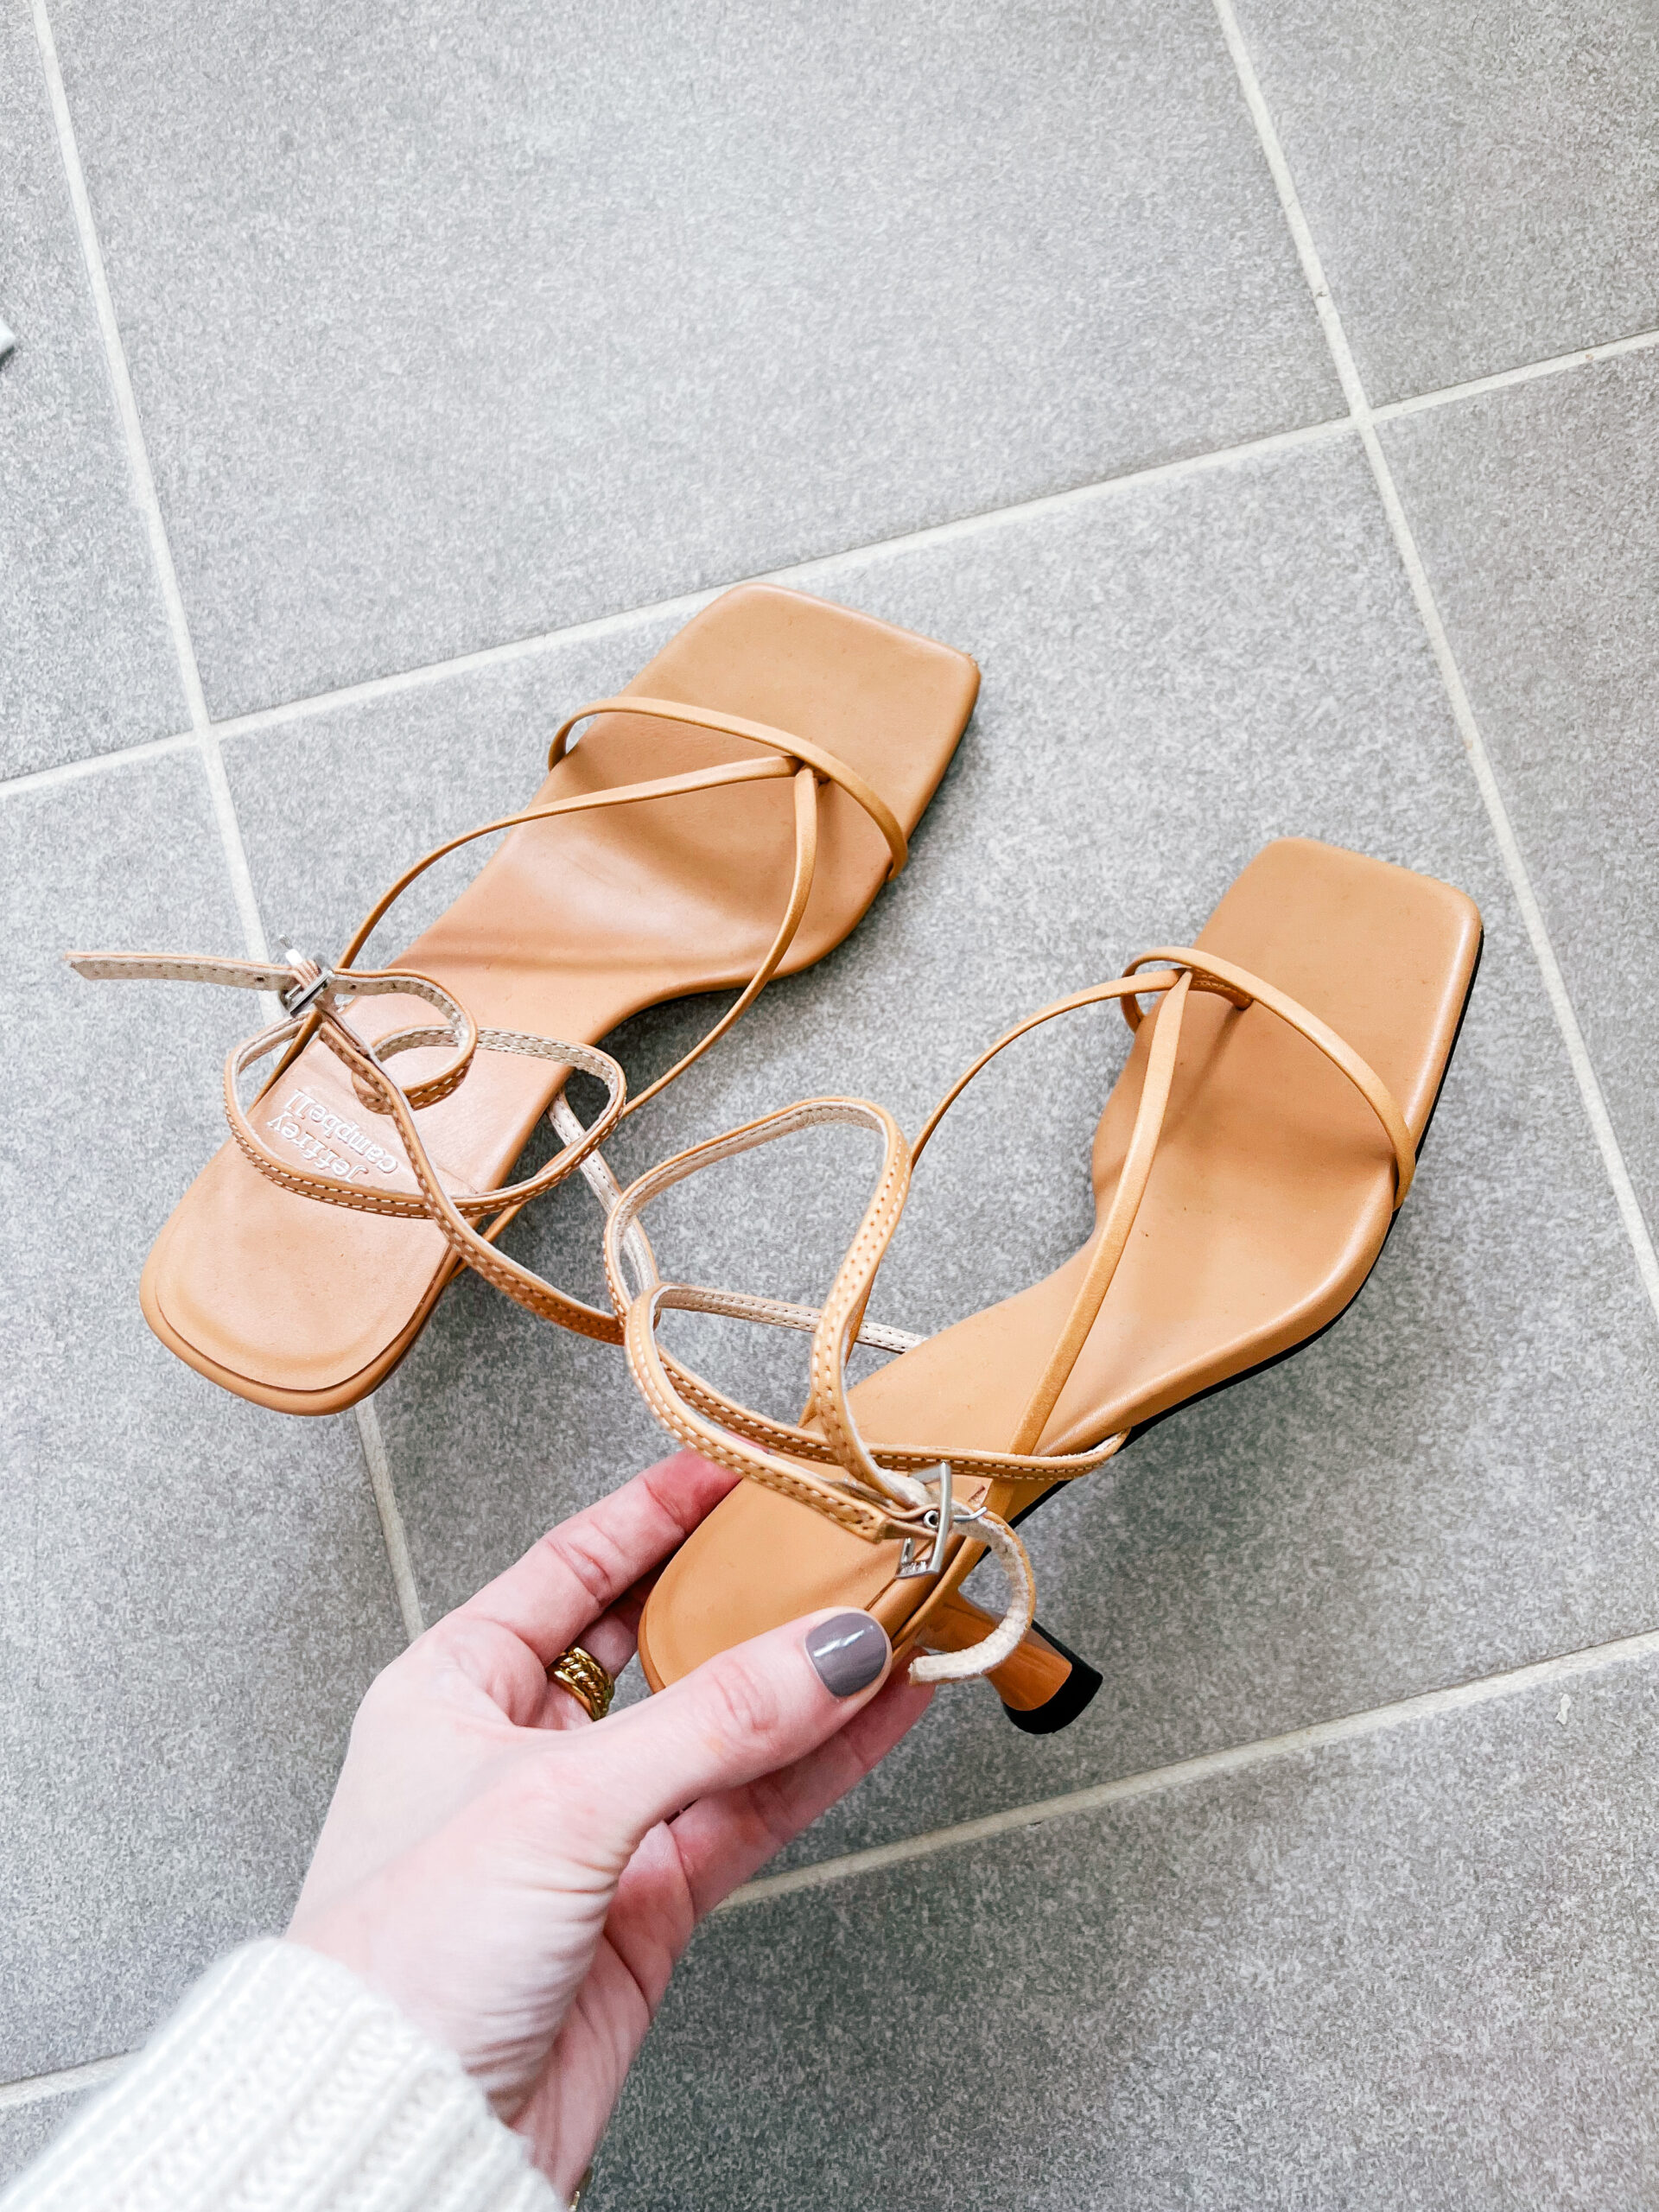 Shoes to Wear To a Casual Summer Wedding